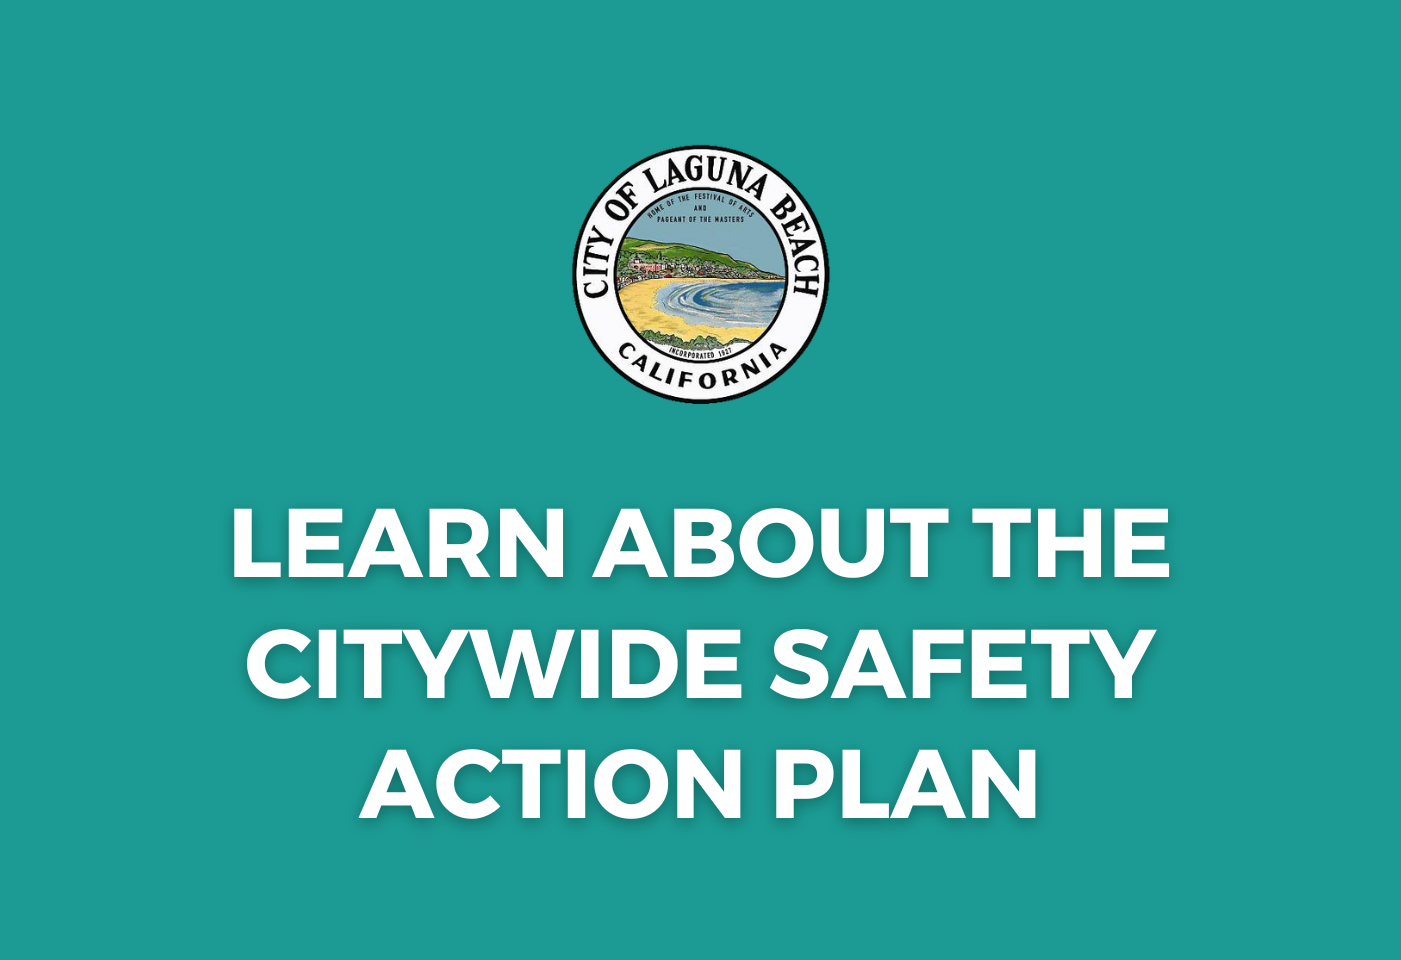 Citywide Safety Action Plan